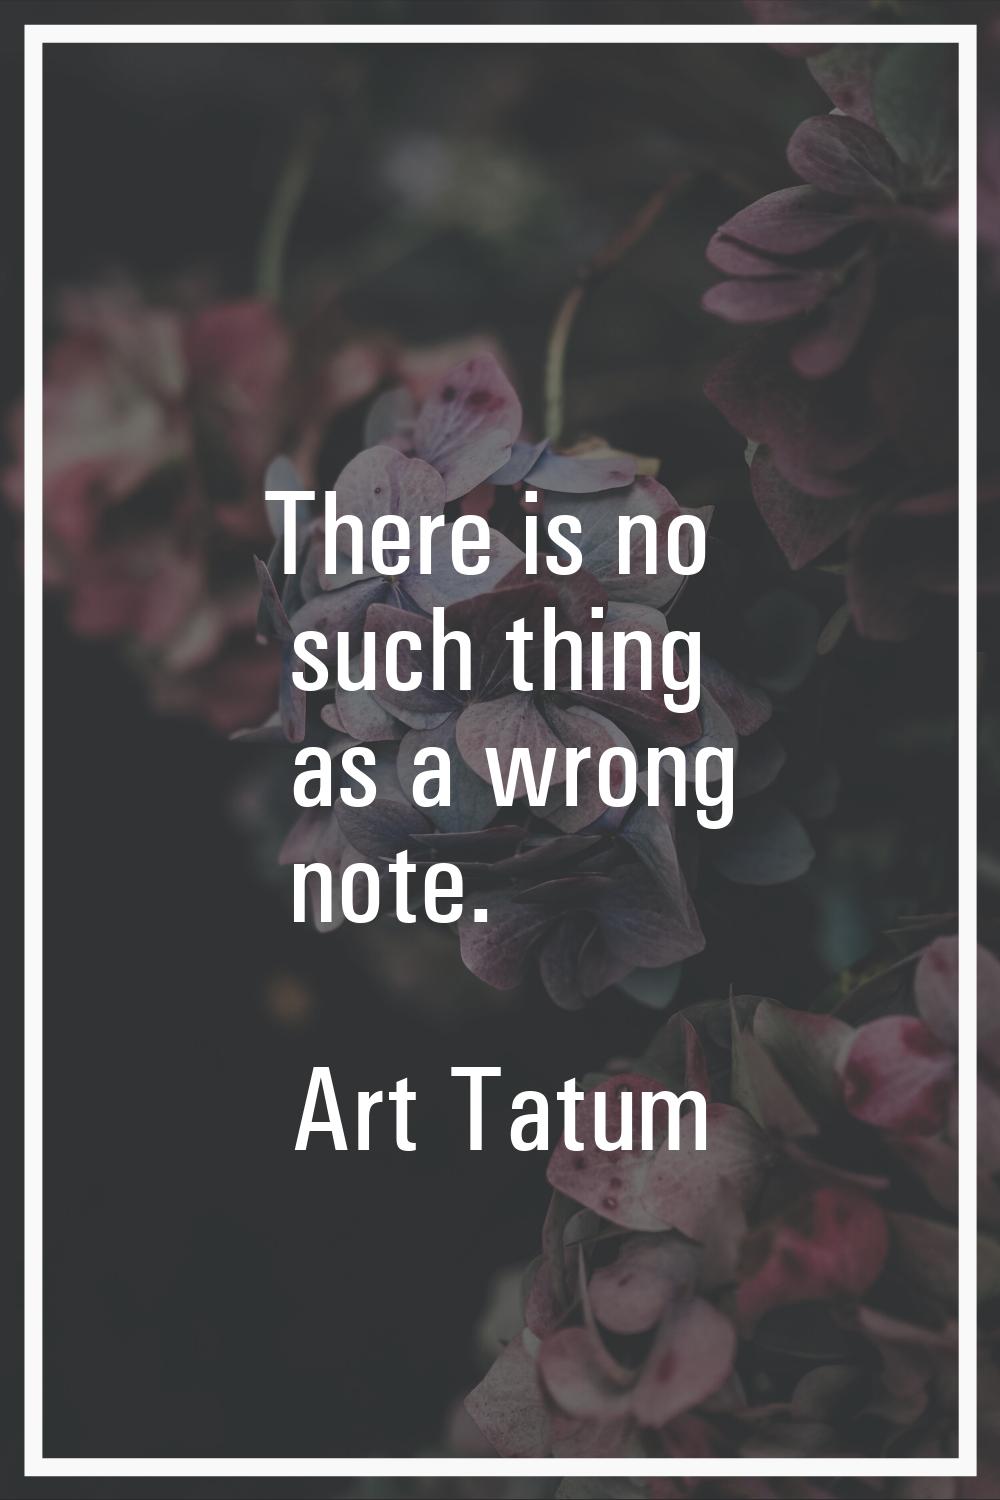 There is no such thing as a wrong note.